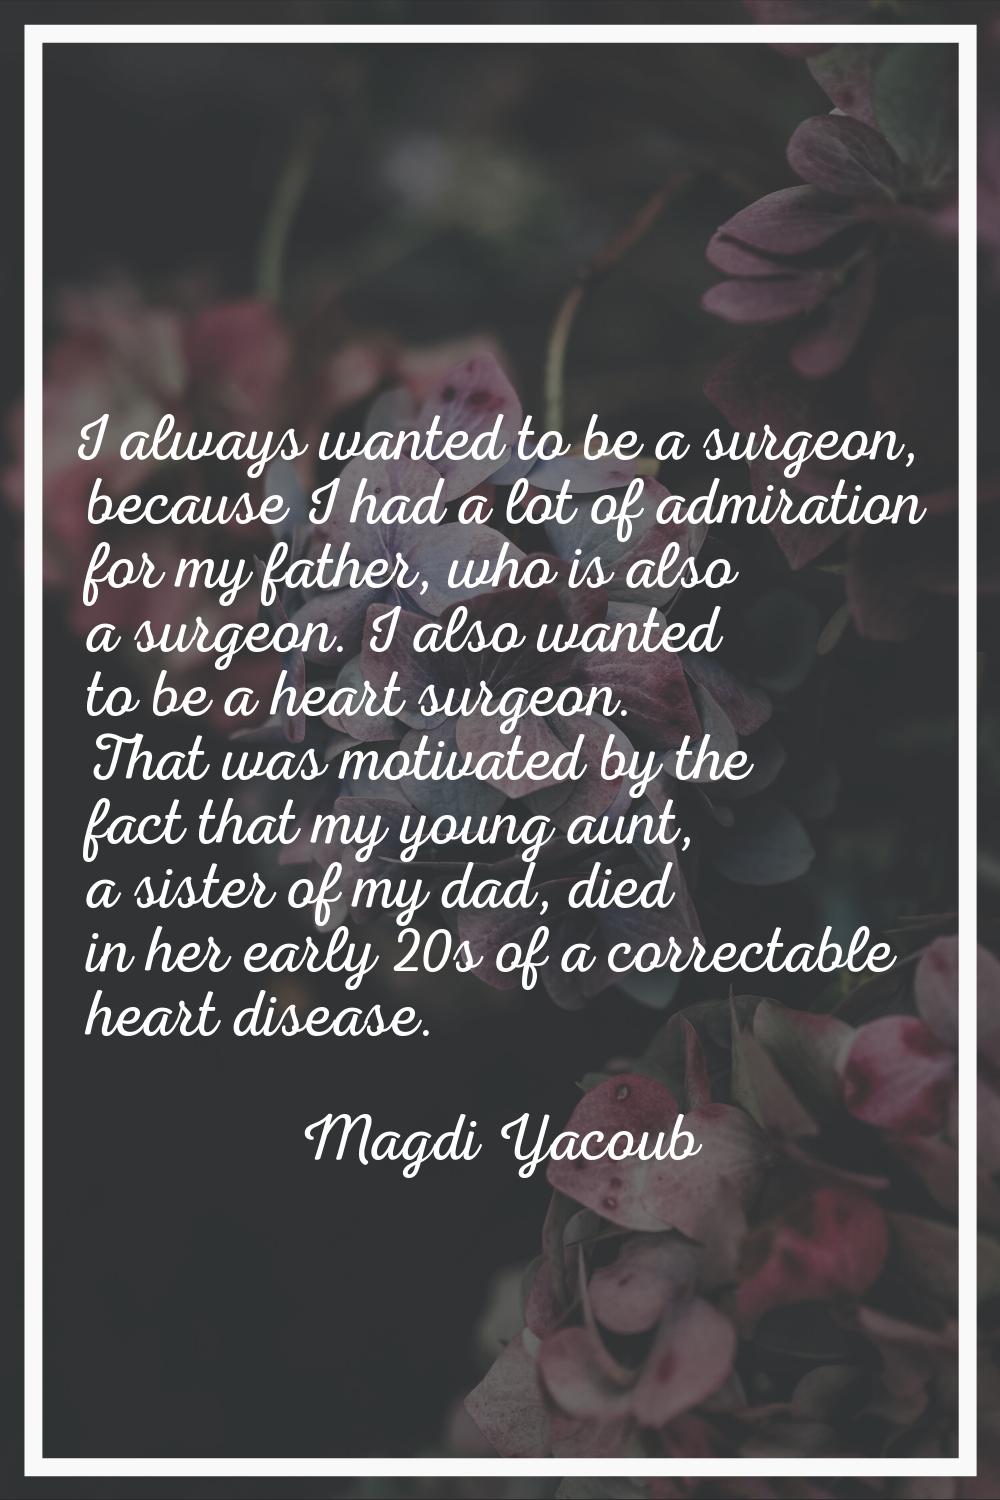 I always wanted to be a surgeon, because I had a lot of admiration for my father, who is also a sur